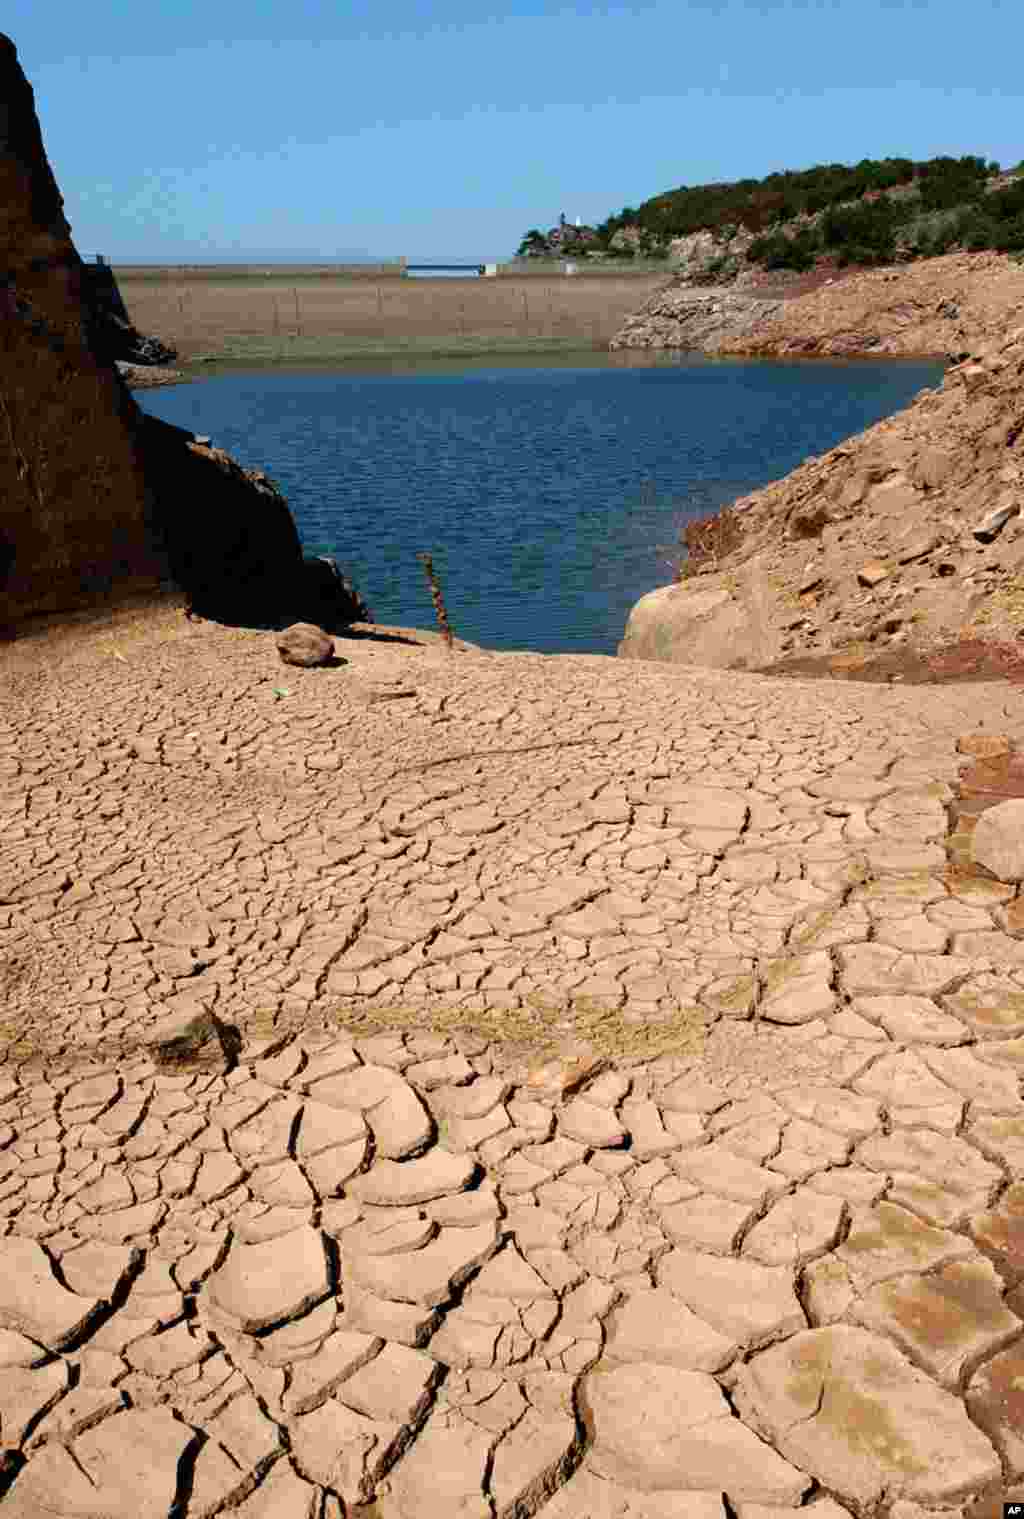 In this 2003 file photo, the Ibardin lake in southern French was almost dry due to a heat wave that killed 71,000 people, making it the most deadly heat wave in the world to date.&nbsp;